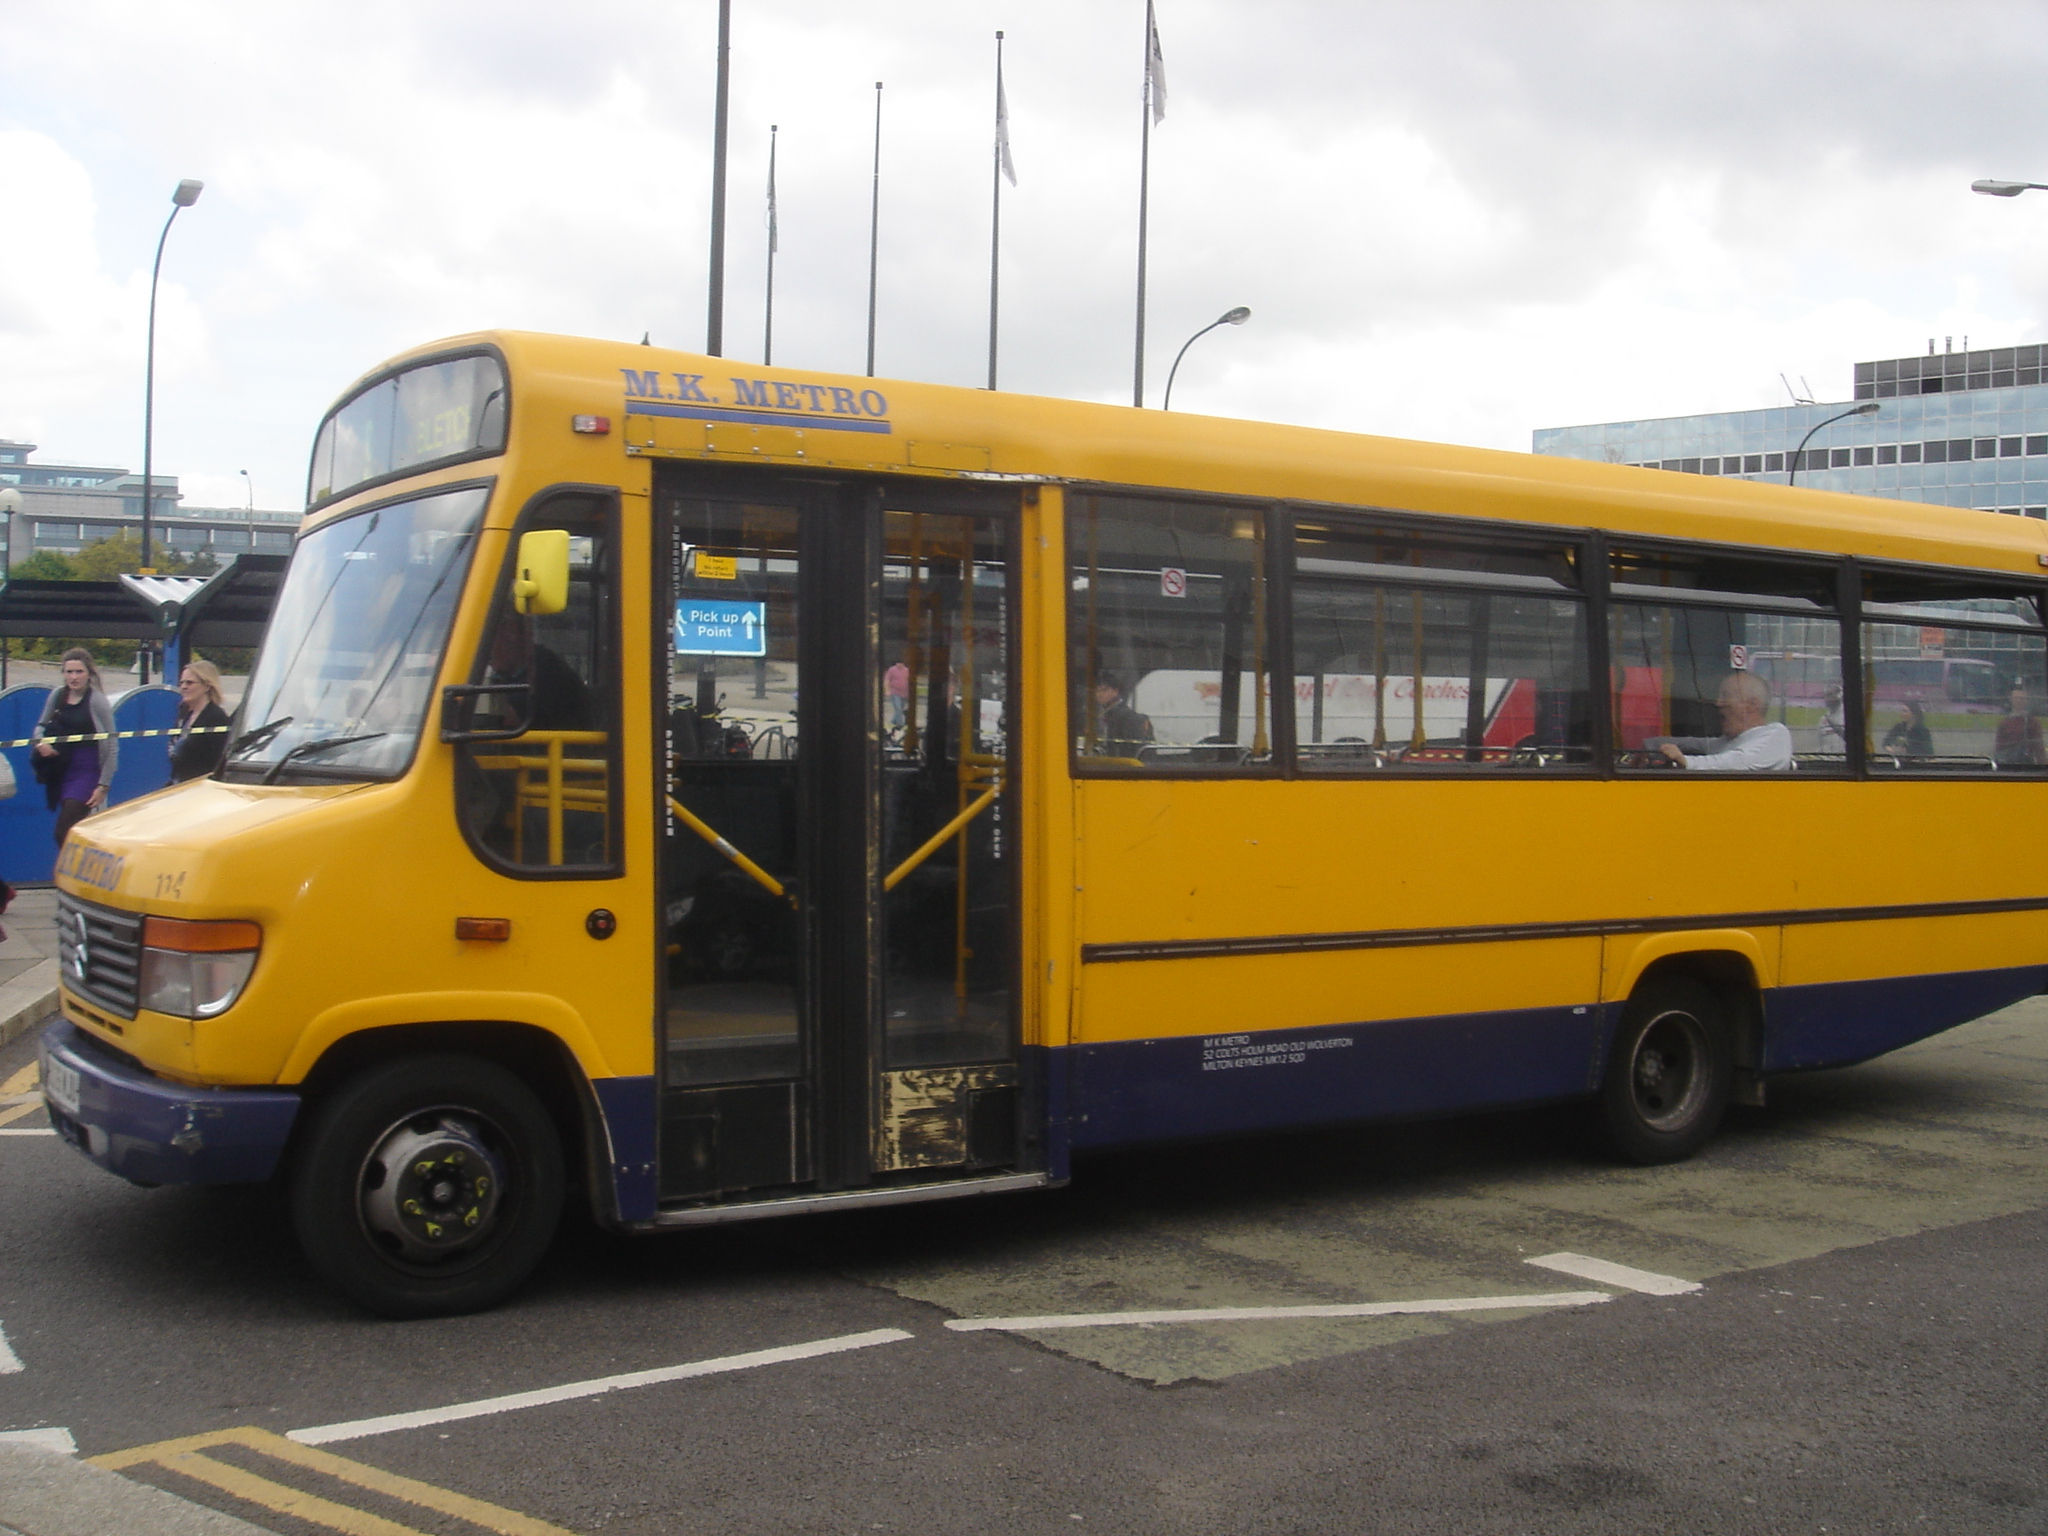 the bus is yellow with blue stripes in front